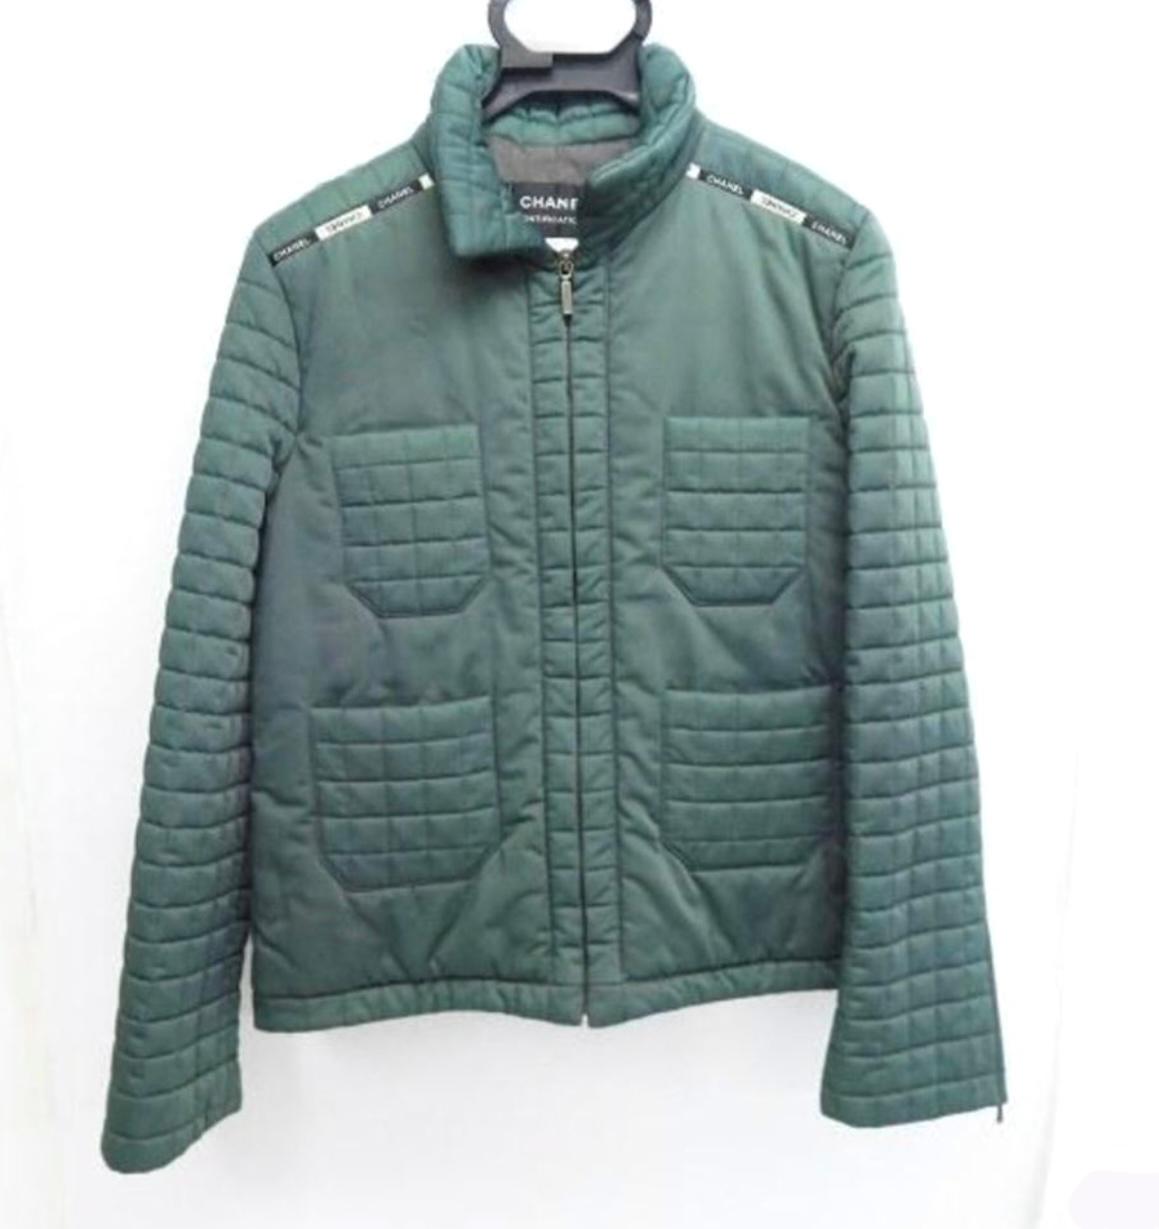 Chanel CC Logo Accents Quilted Emerald Jacket For Sale 1